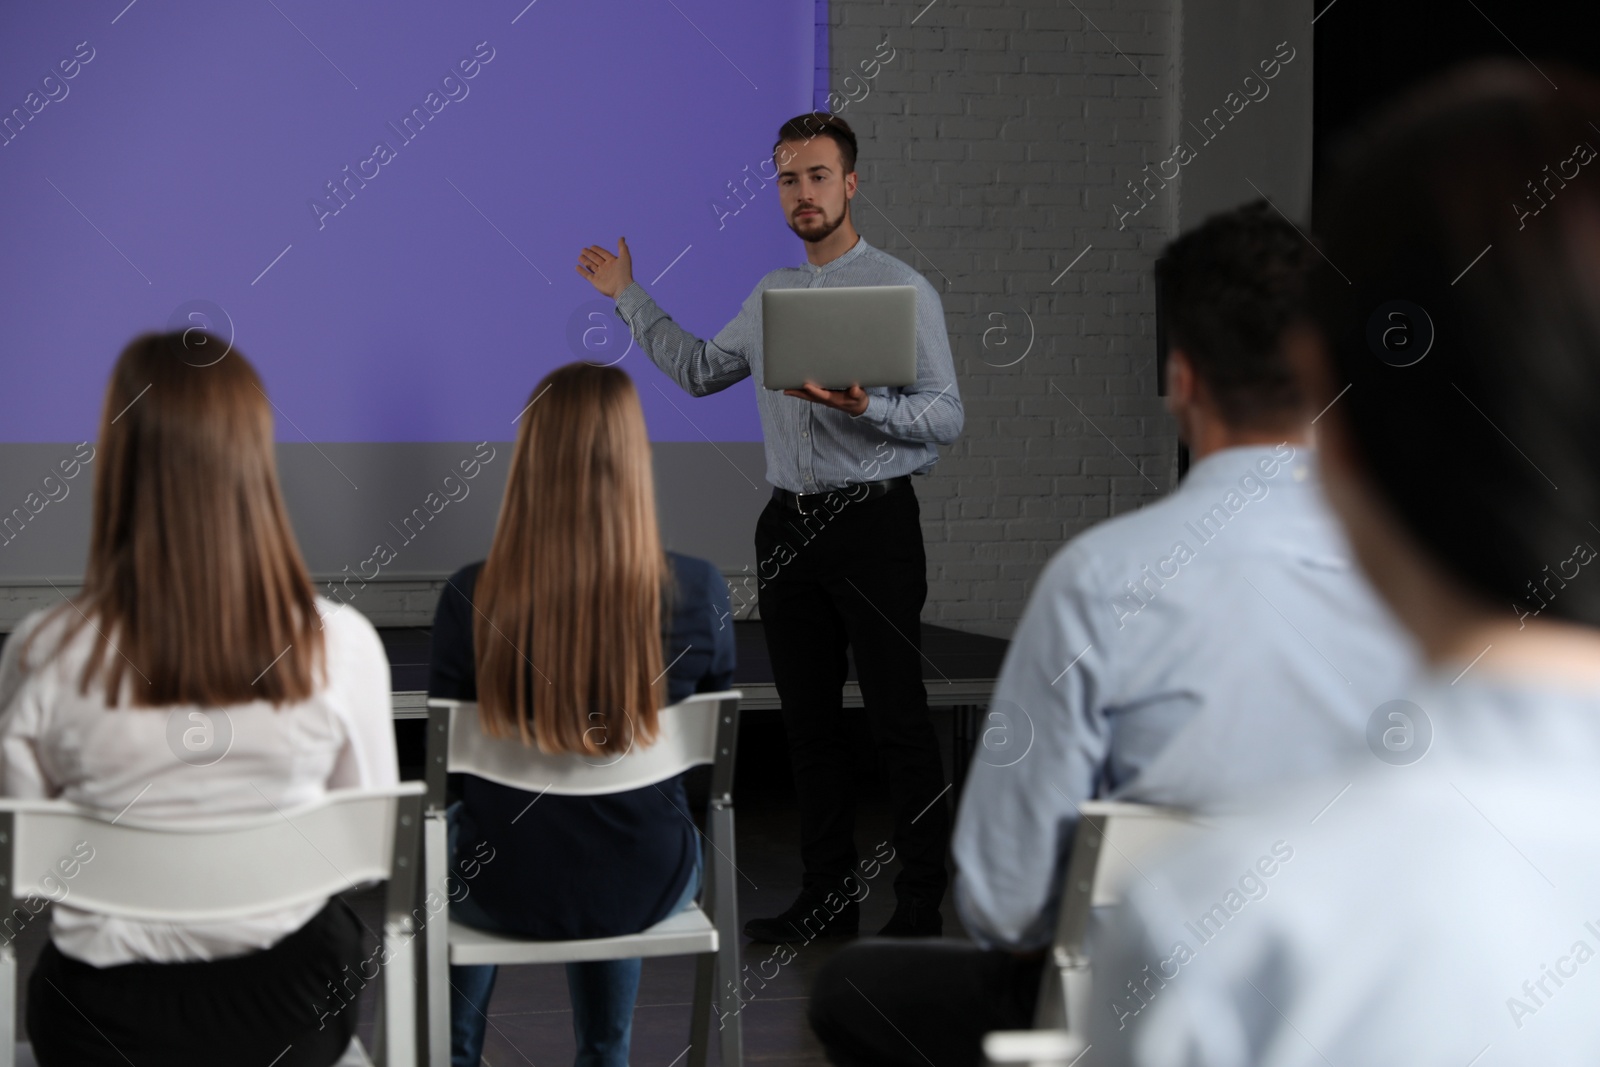 Photo of Male business trainer with laptop giving lecture in conference room with projection screen